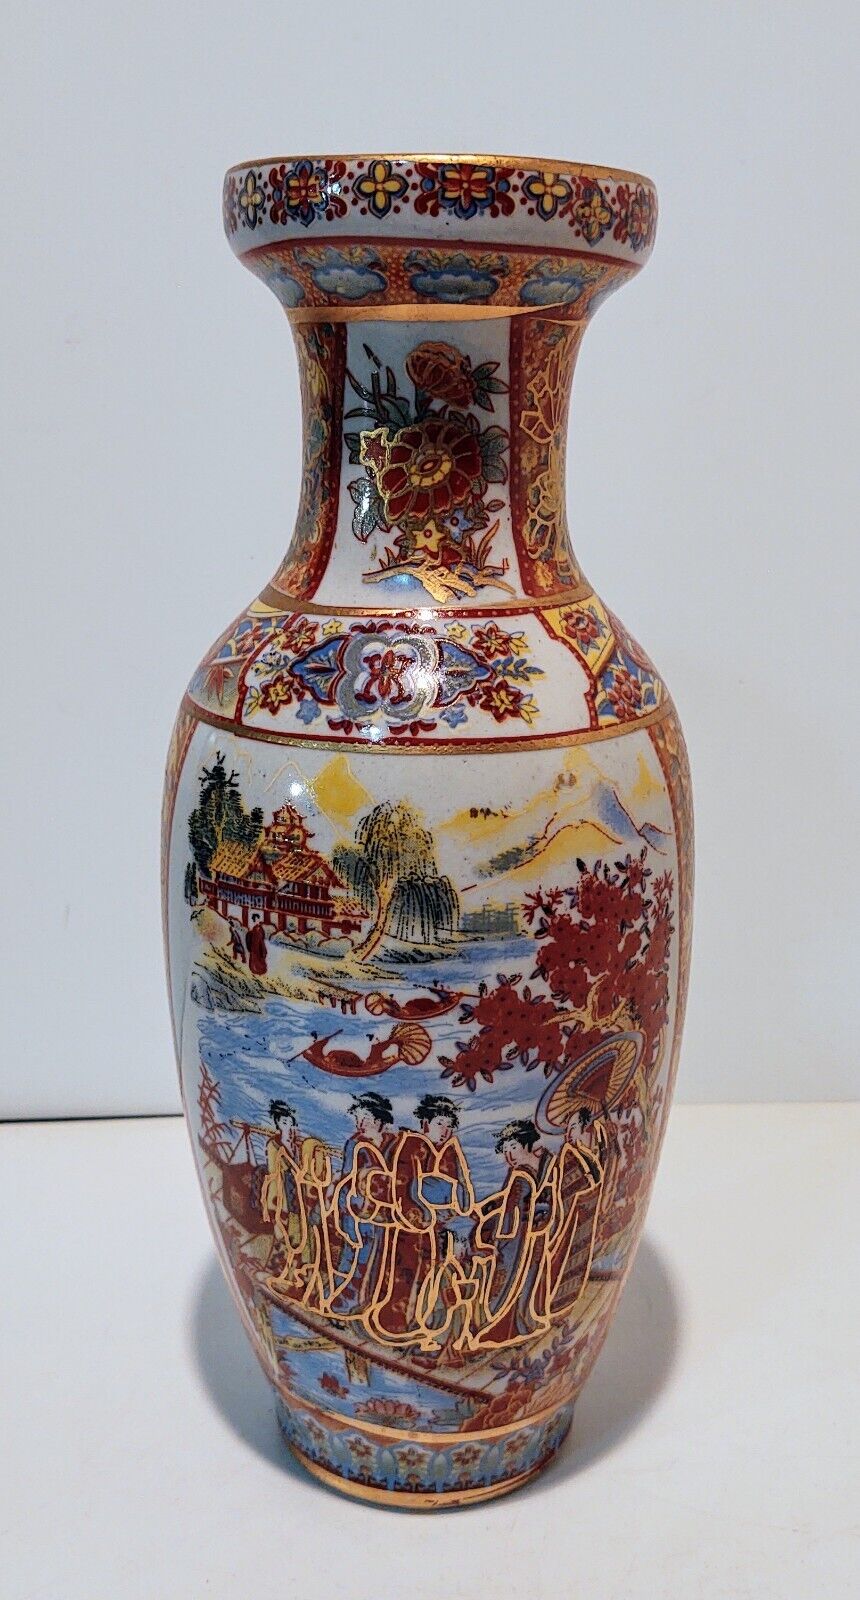  Vintage Chinese Moriage Pottery Vase Multicolored Hand Painted Water Scene